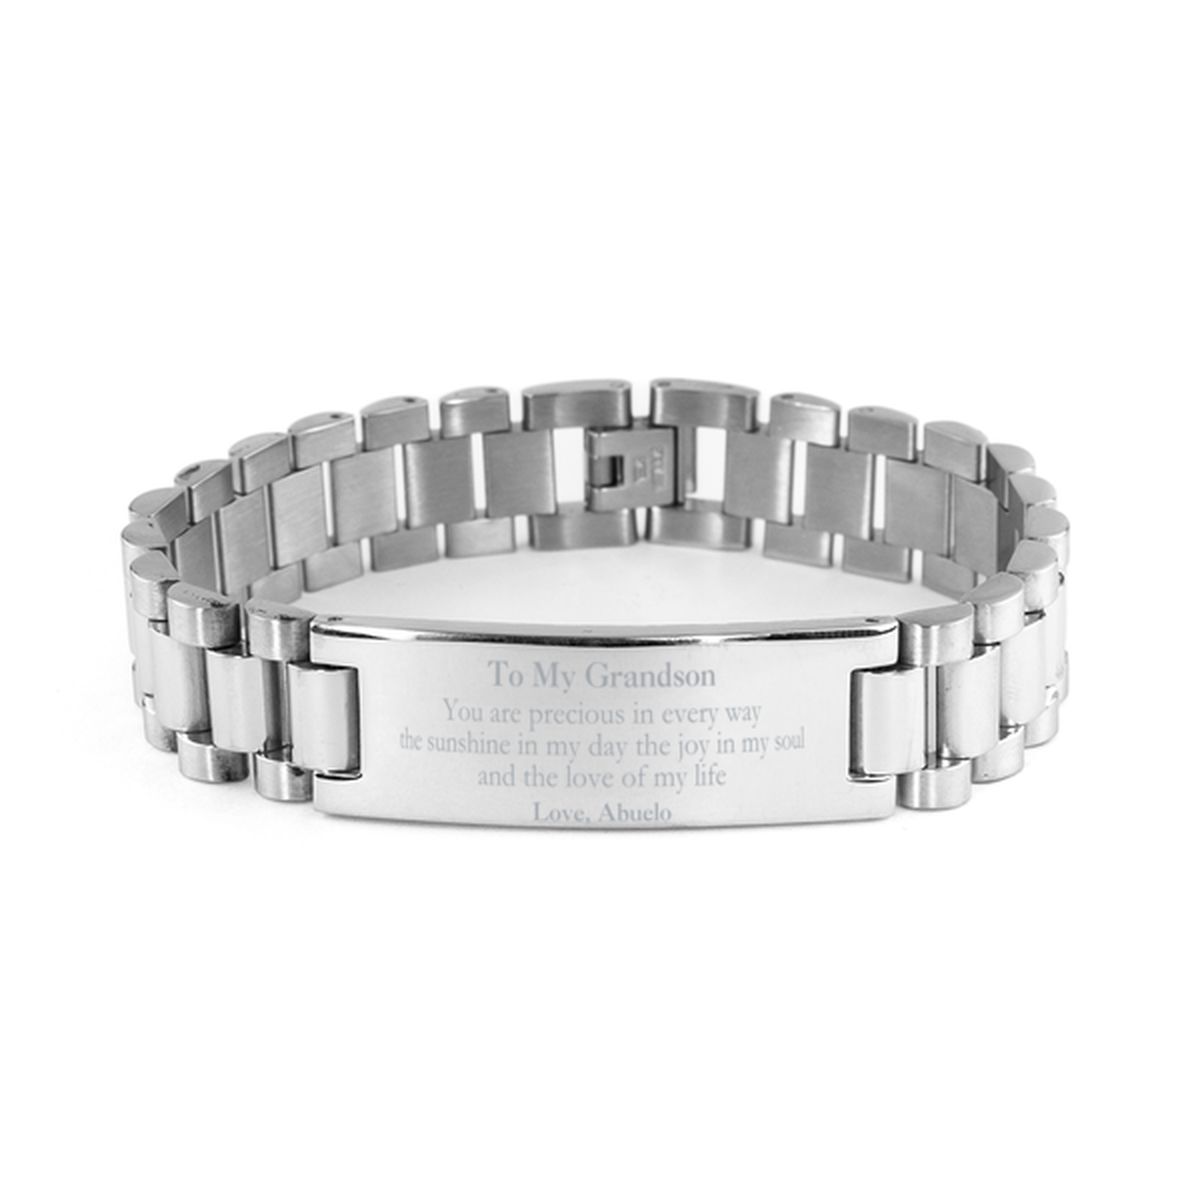 Graduation Gifts for Grandson Ladder Stainless Steel Bracelet Present from Abuelo, Christmas Grandson Birthday Gifts Grandson You are precious in every way the sunshine in my day. Love, Abuelo